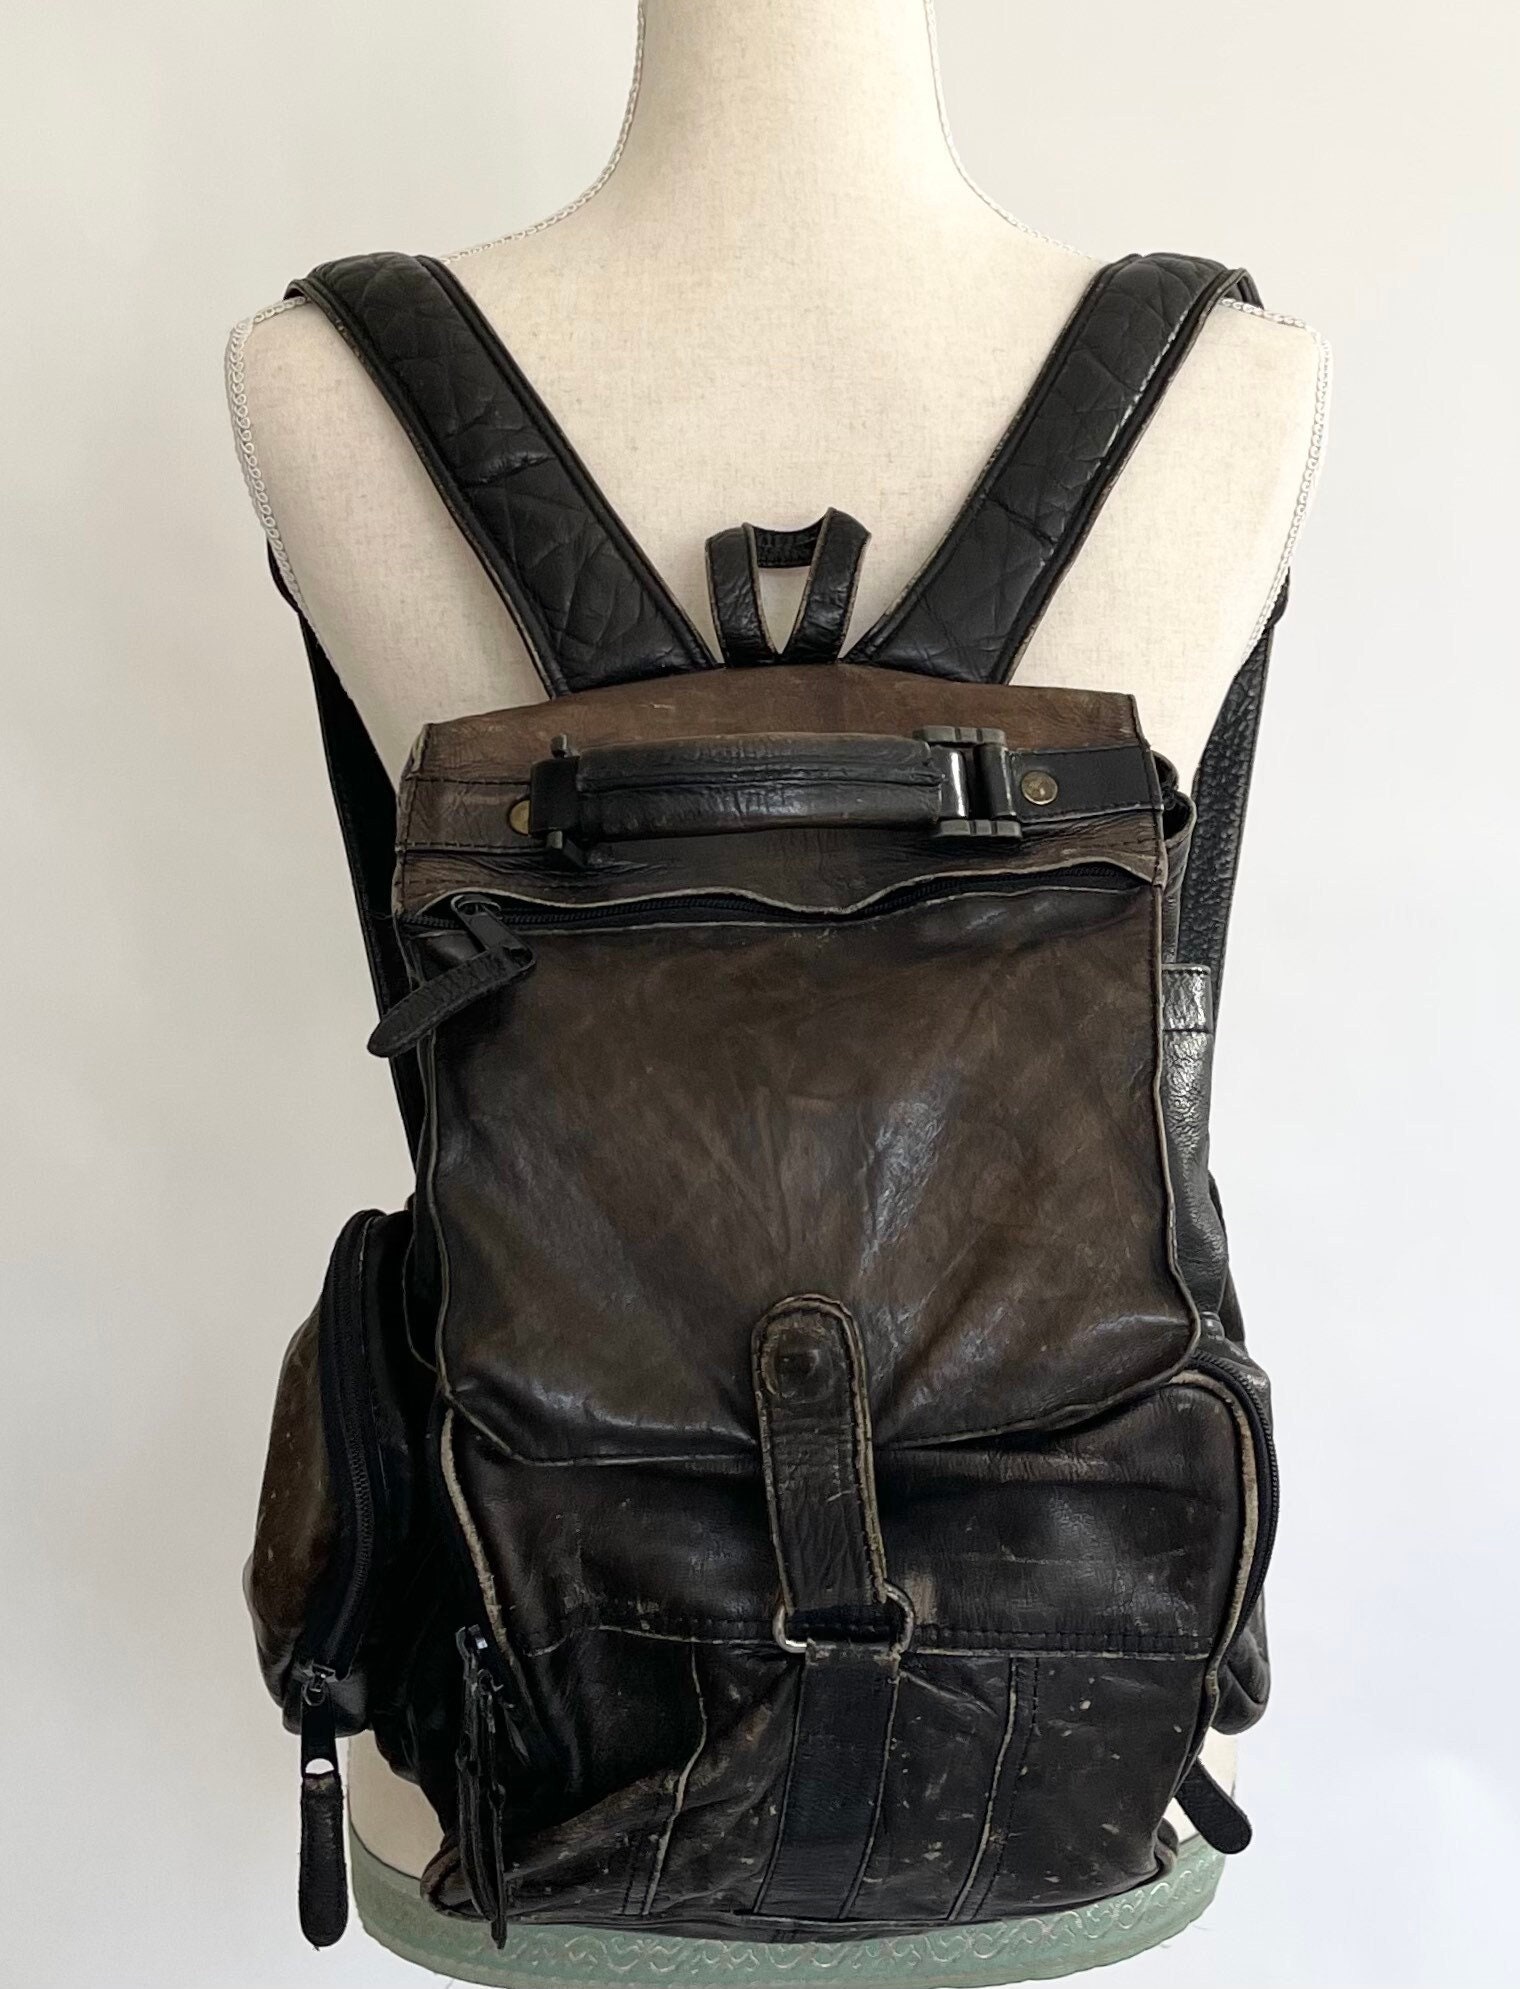 Worn Black Leather Backpack Very Distressed Soft Matte Black Leather ...